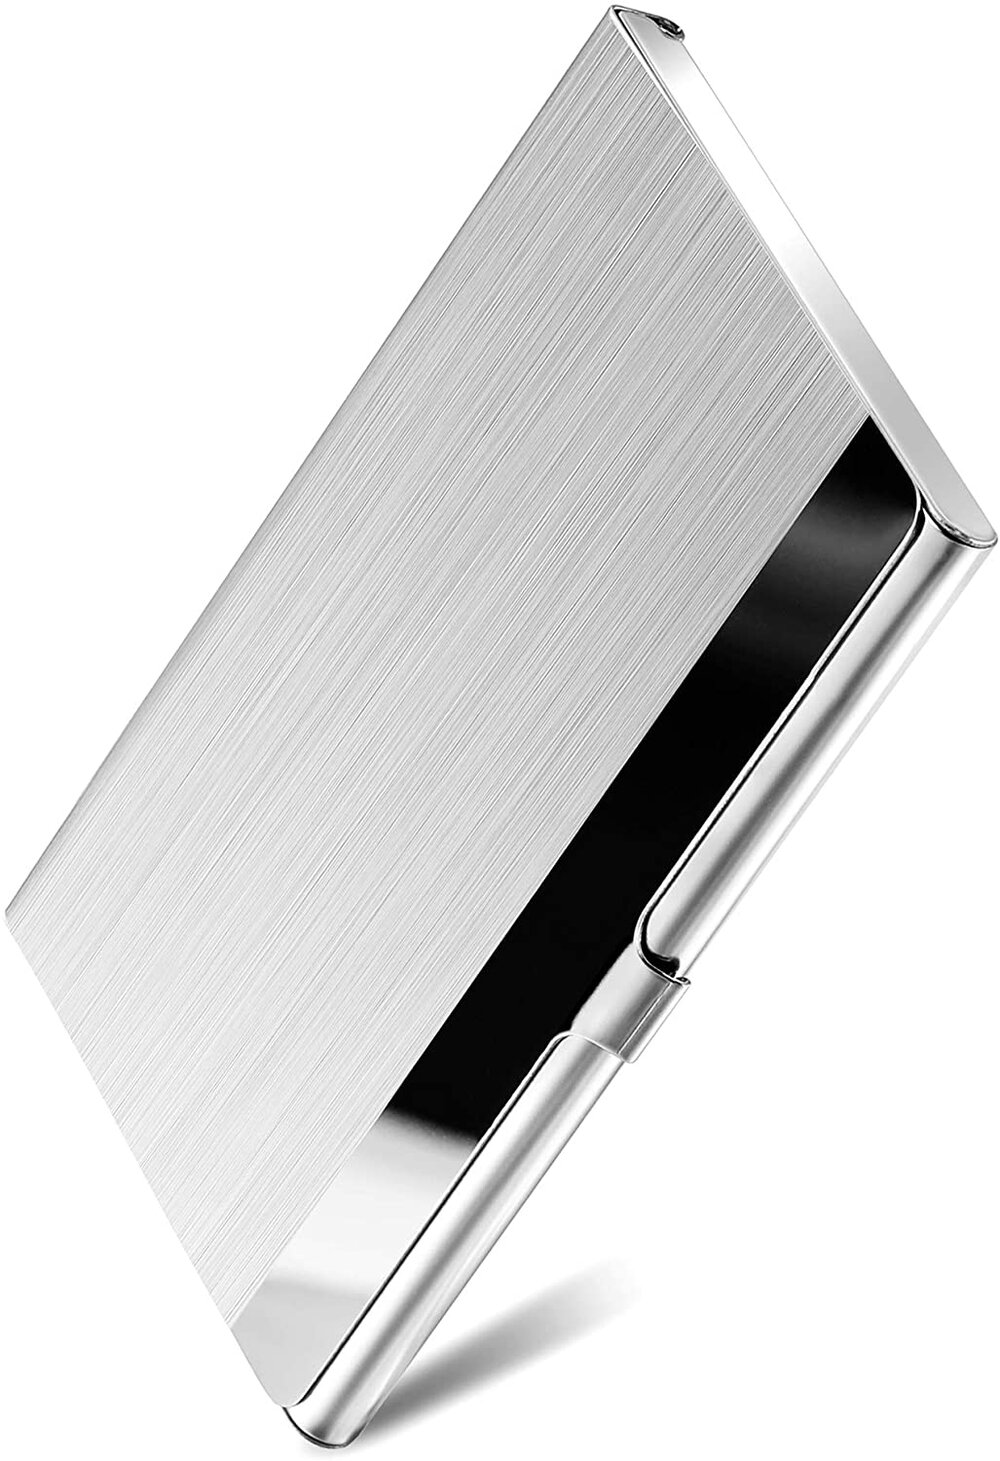 Silver Brushed Stainless Steel MaxGear Business Card Holder for Desk Business Card Display Holders Metal Business Cards Stand Desktop Name Card Organizer Capacity: 50 Cards 3 Pack 